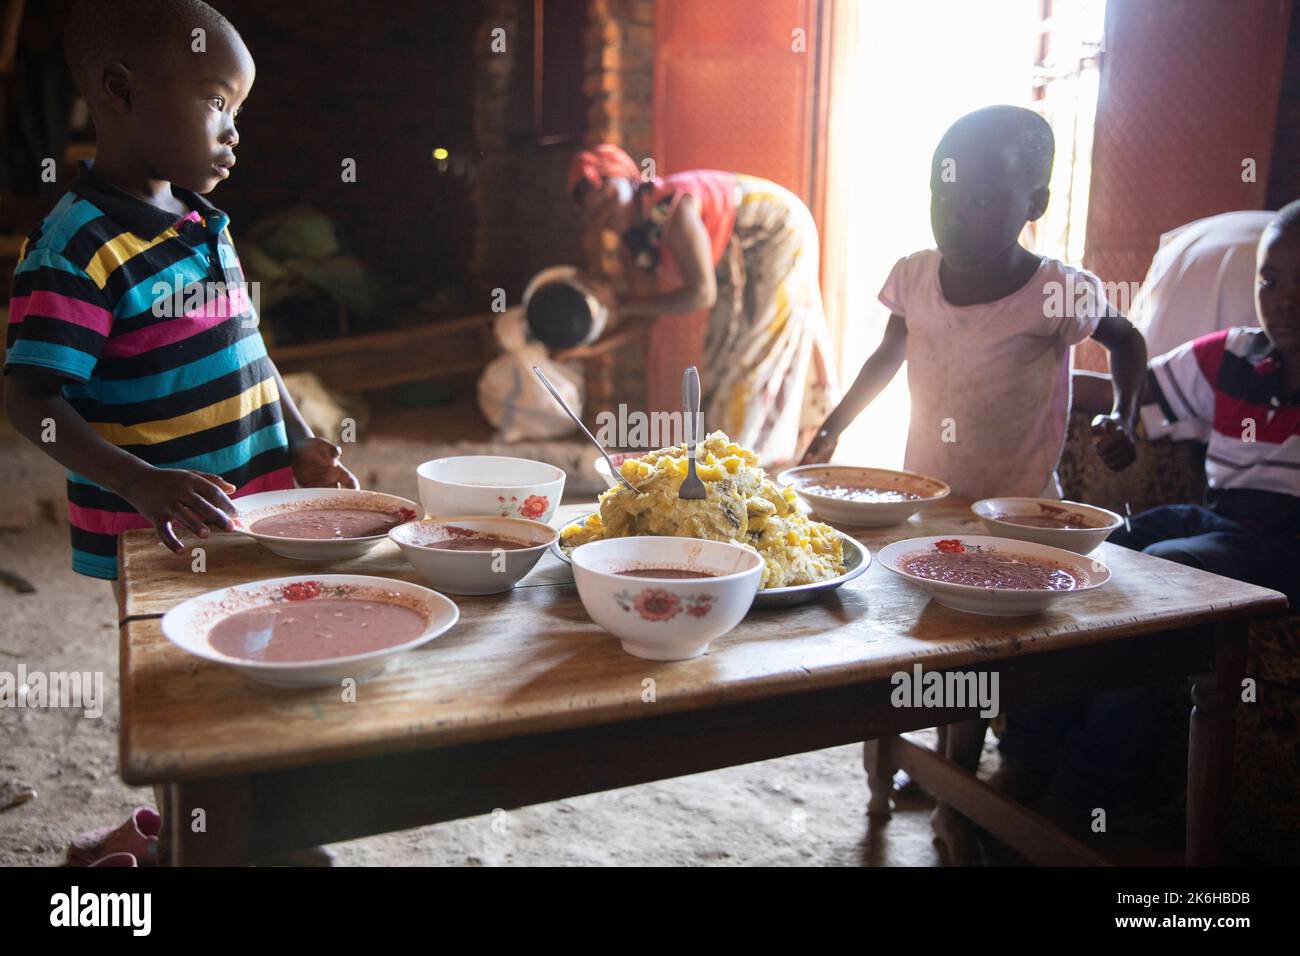 Ugandan family sharing a meal of beans and mashed savory bananas together in their home in Kasese District, Uganda, East Africa. Stock Photo